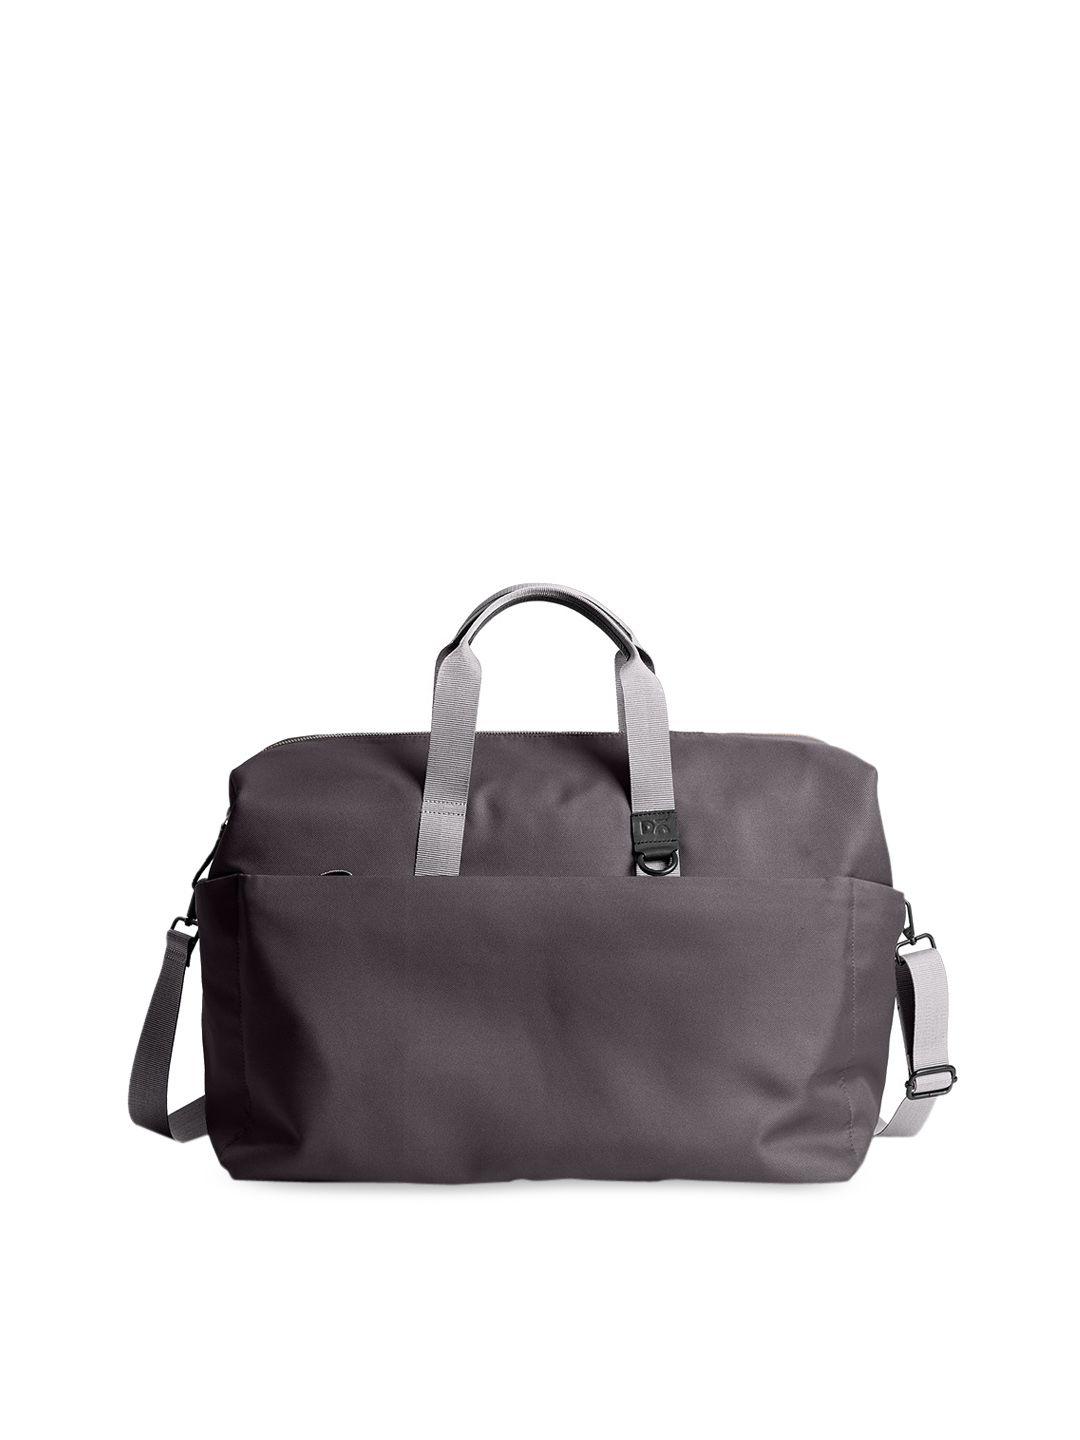 dailyobjects recycled gravity travel duffle bag